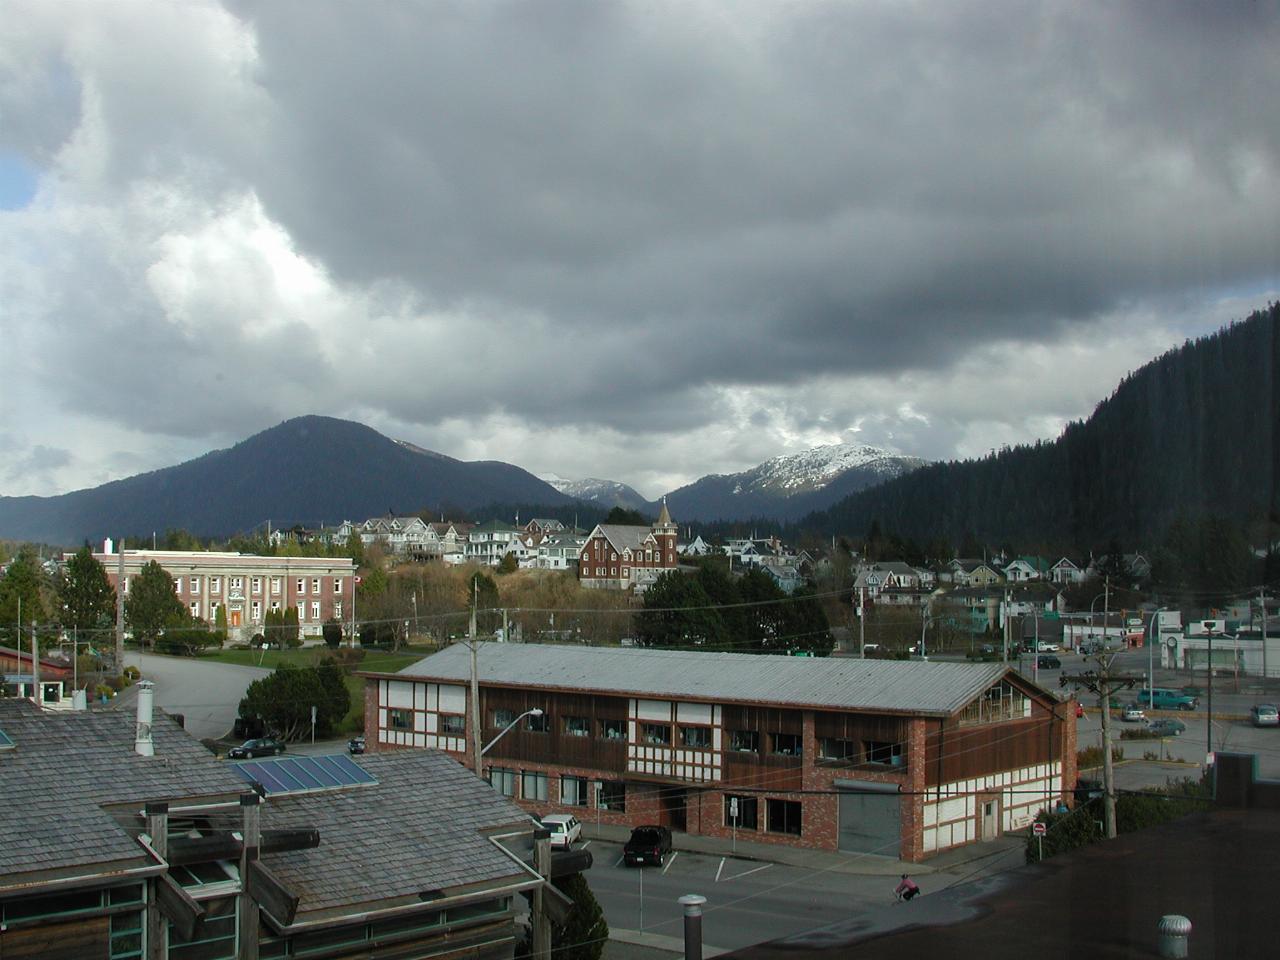 Part of Prince Rupert, as seen from my hotel room